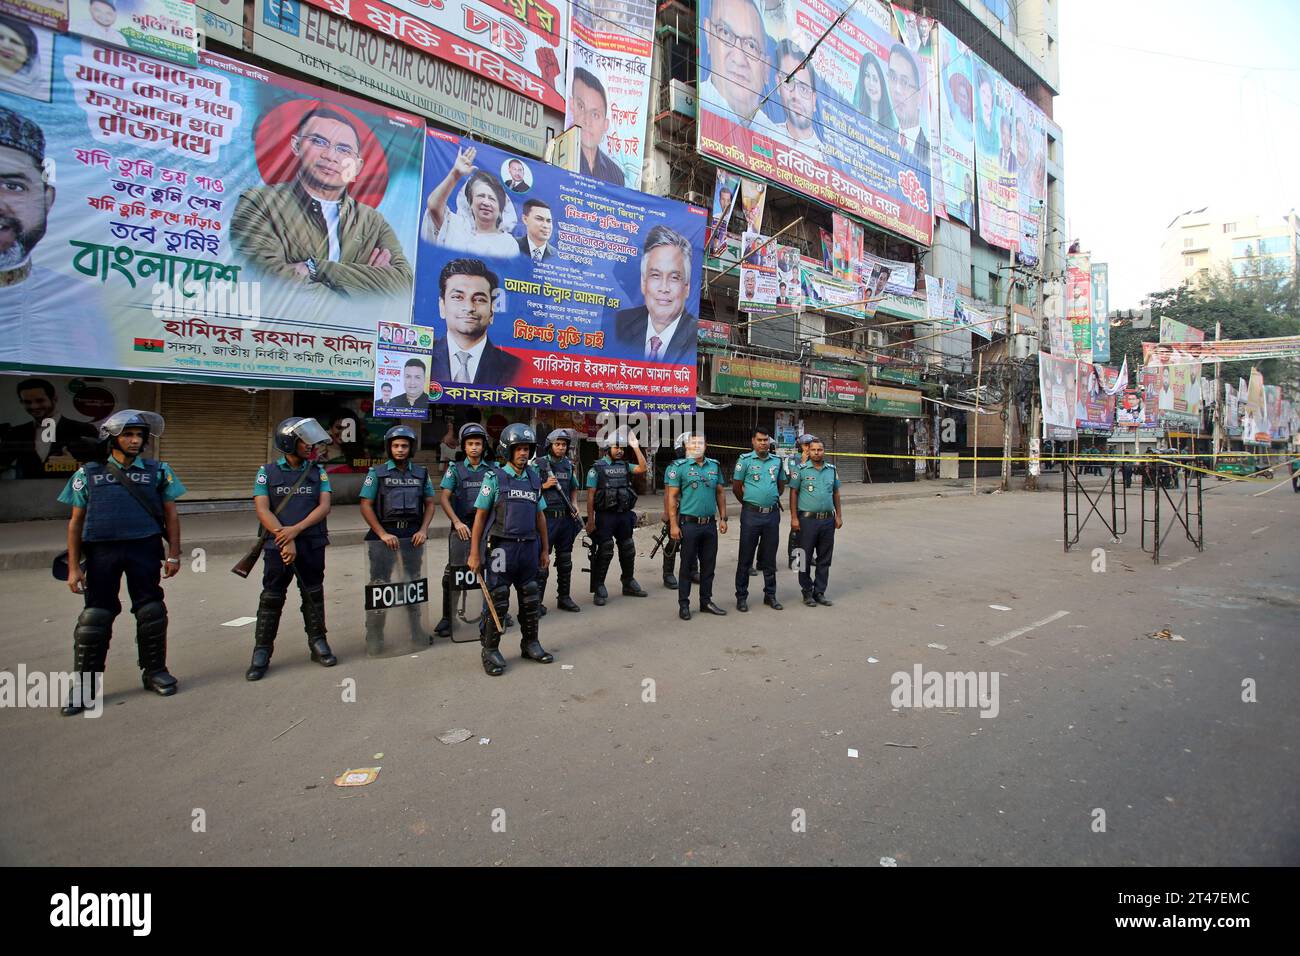 Bangladesh's Criminal Investigation Department (CID) unit gather along a street as they inspect a protest site after Bangladesh Nationalist party (BNP) activists held a rally amid the ongoing nationwide strike in Dhaka on October 29, 2023. More than 100,000 supporters of two major Bangladesh opposition parties rallied on October 28, to demand Prime Minister Sheikh Hasina step down to allow a free and fair vote under a neutral government. Both BNP and Jamaat-e-Islami called for a nationwide strike on October 29, 2023, to protest the violence. Photo by Habibur Rahman/ABACAPRESS.COM Stock Photo